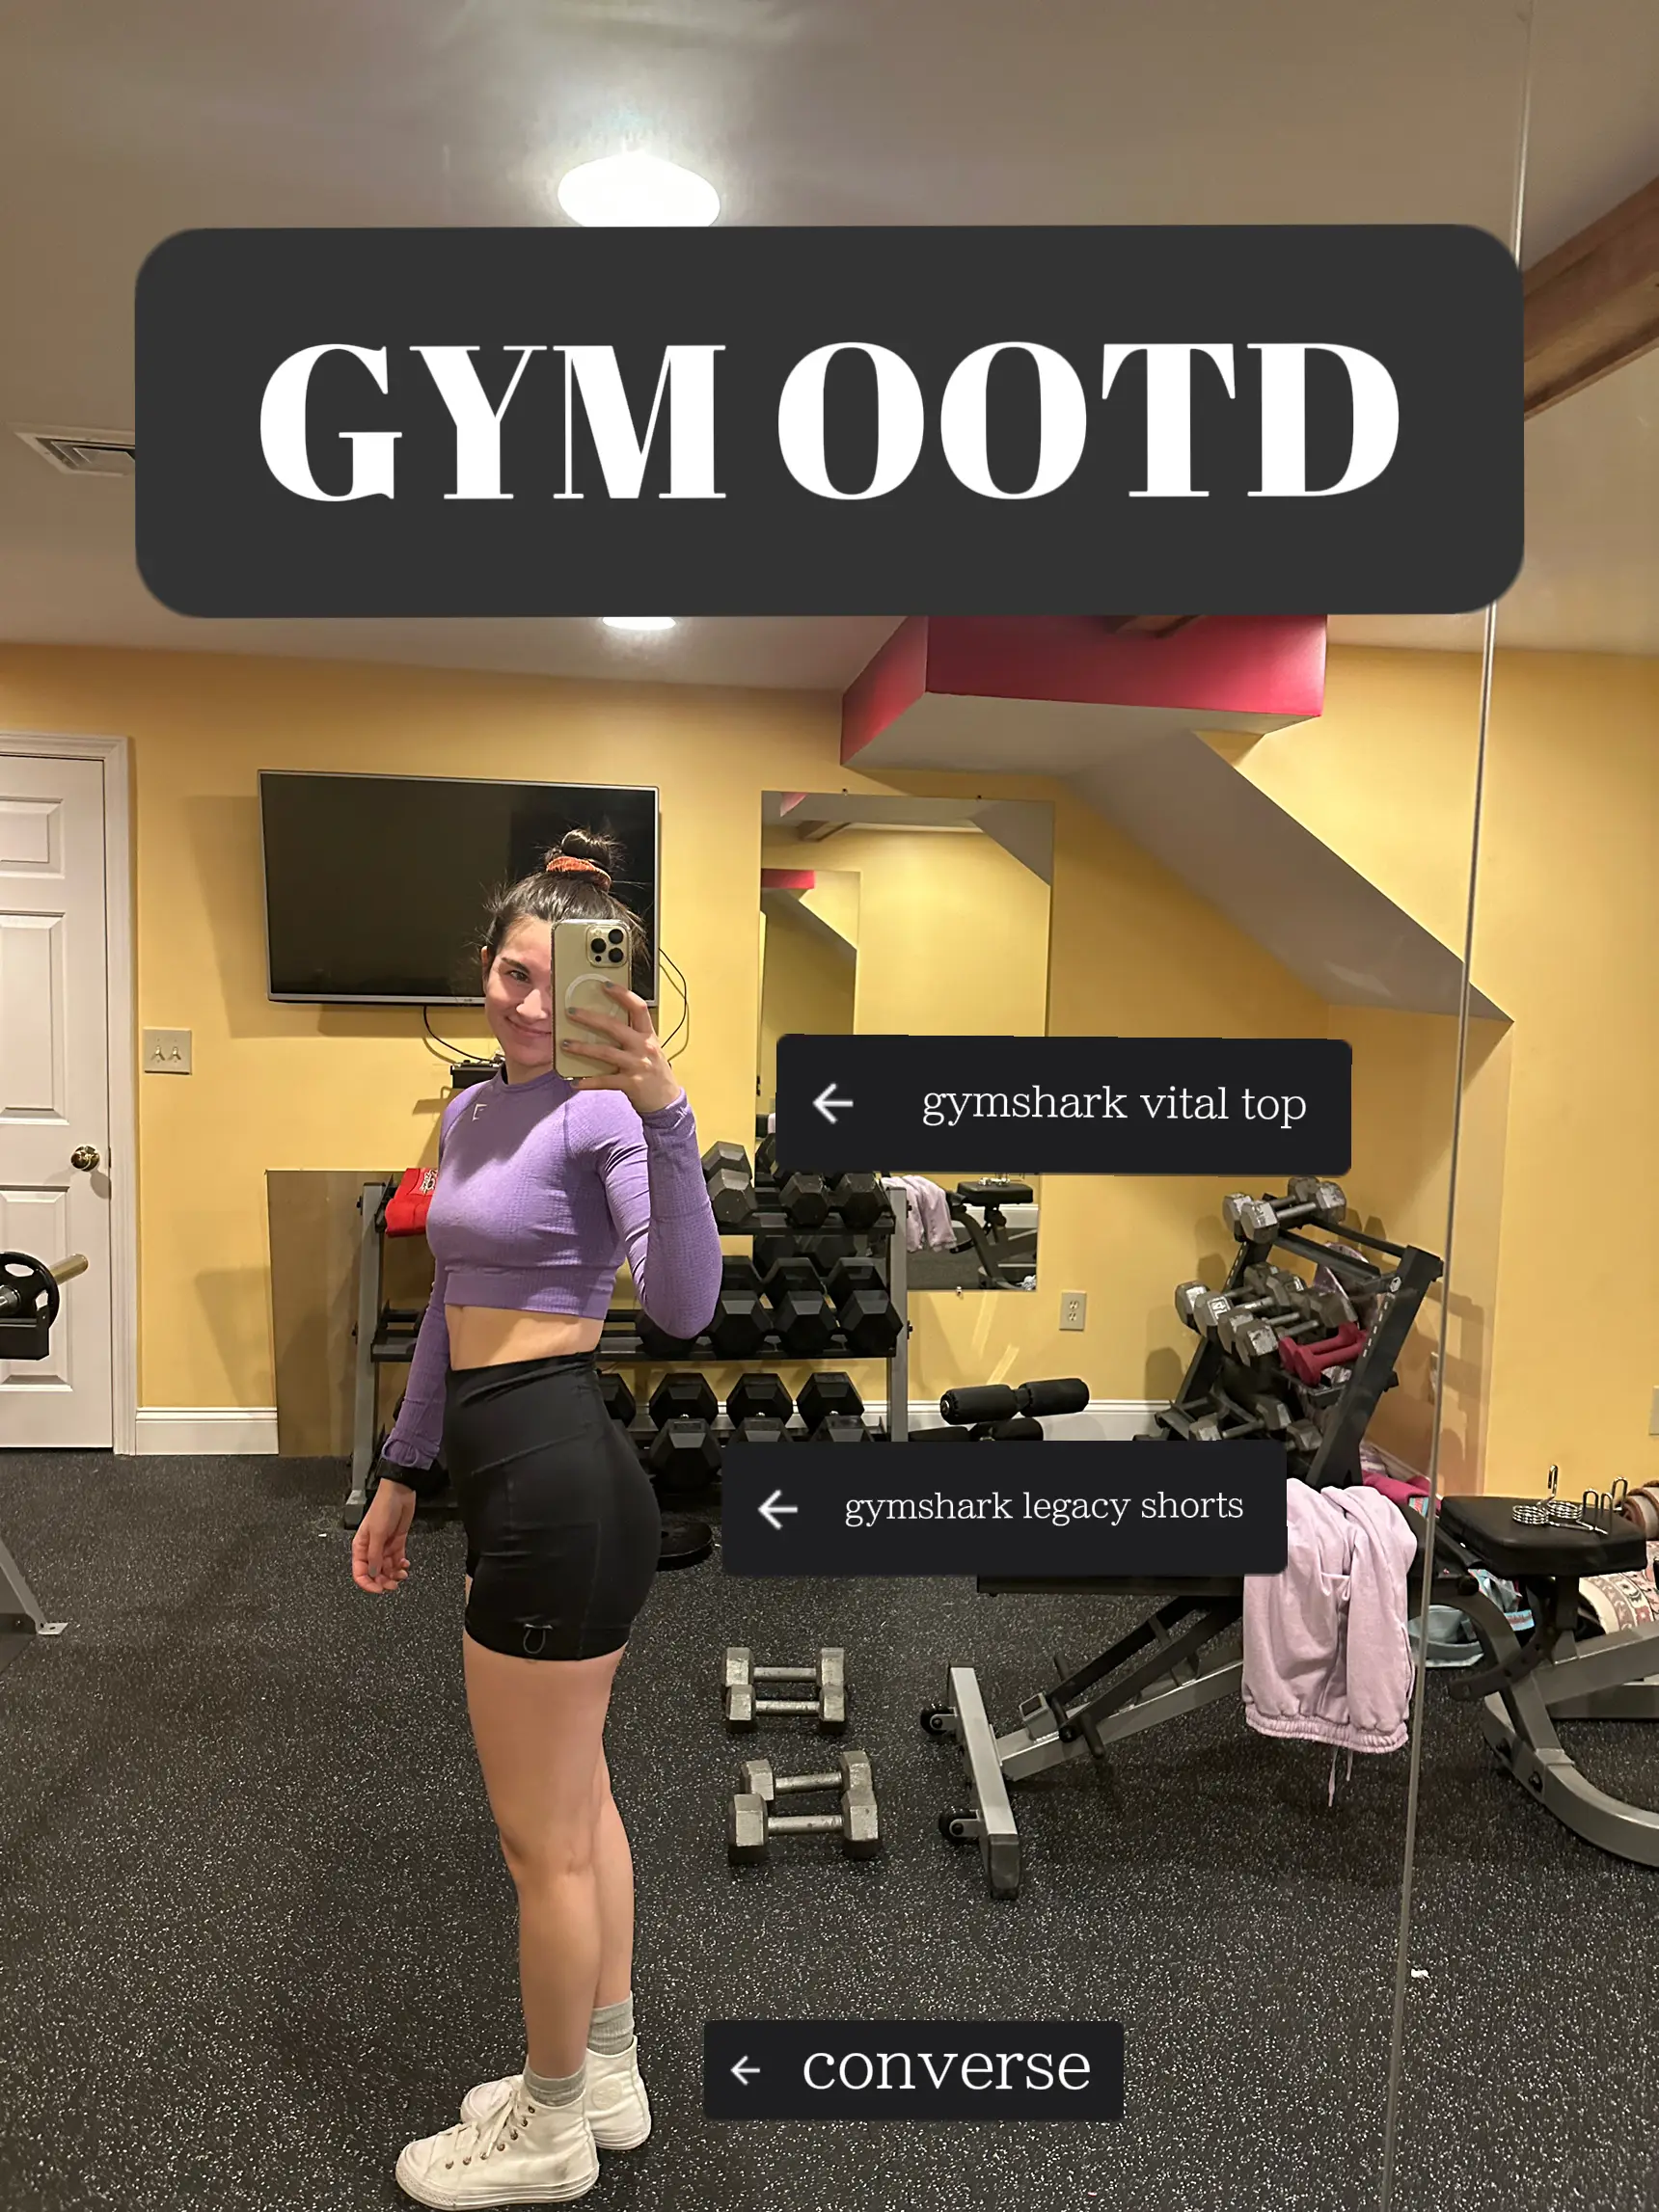 GYM OOTD, Gallery posted by Robin Croce